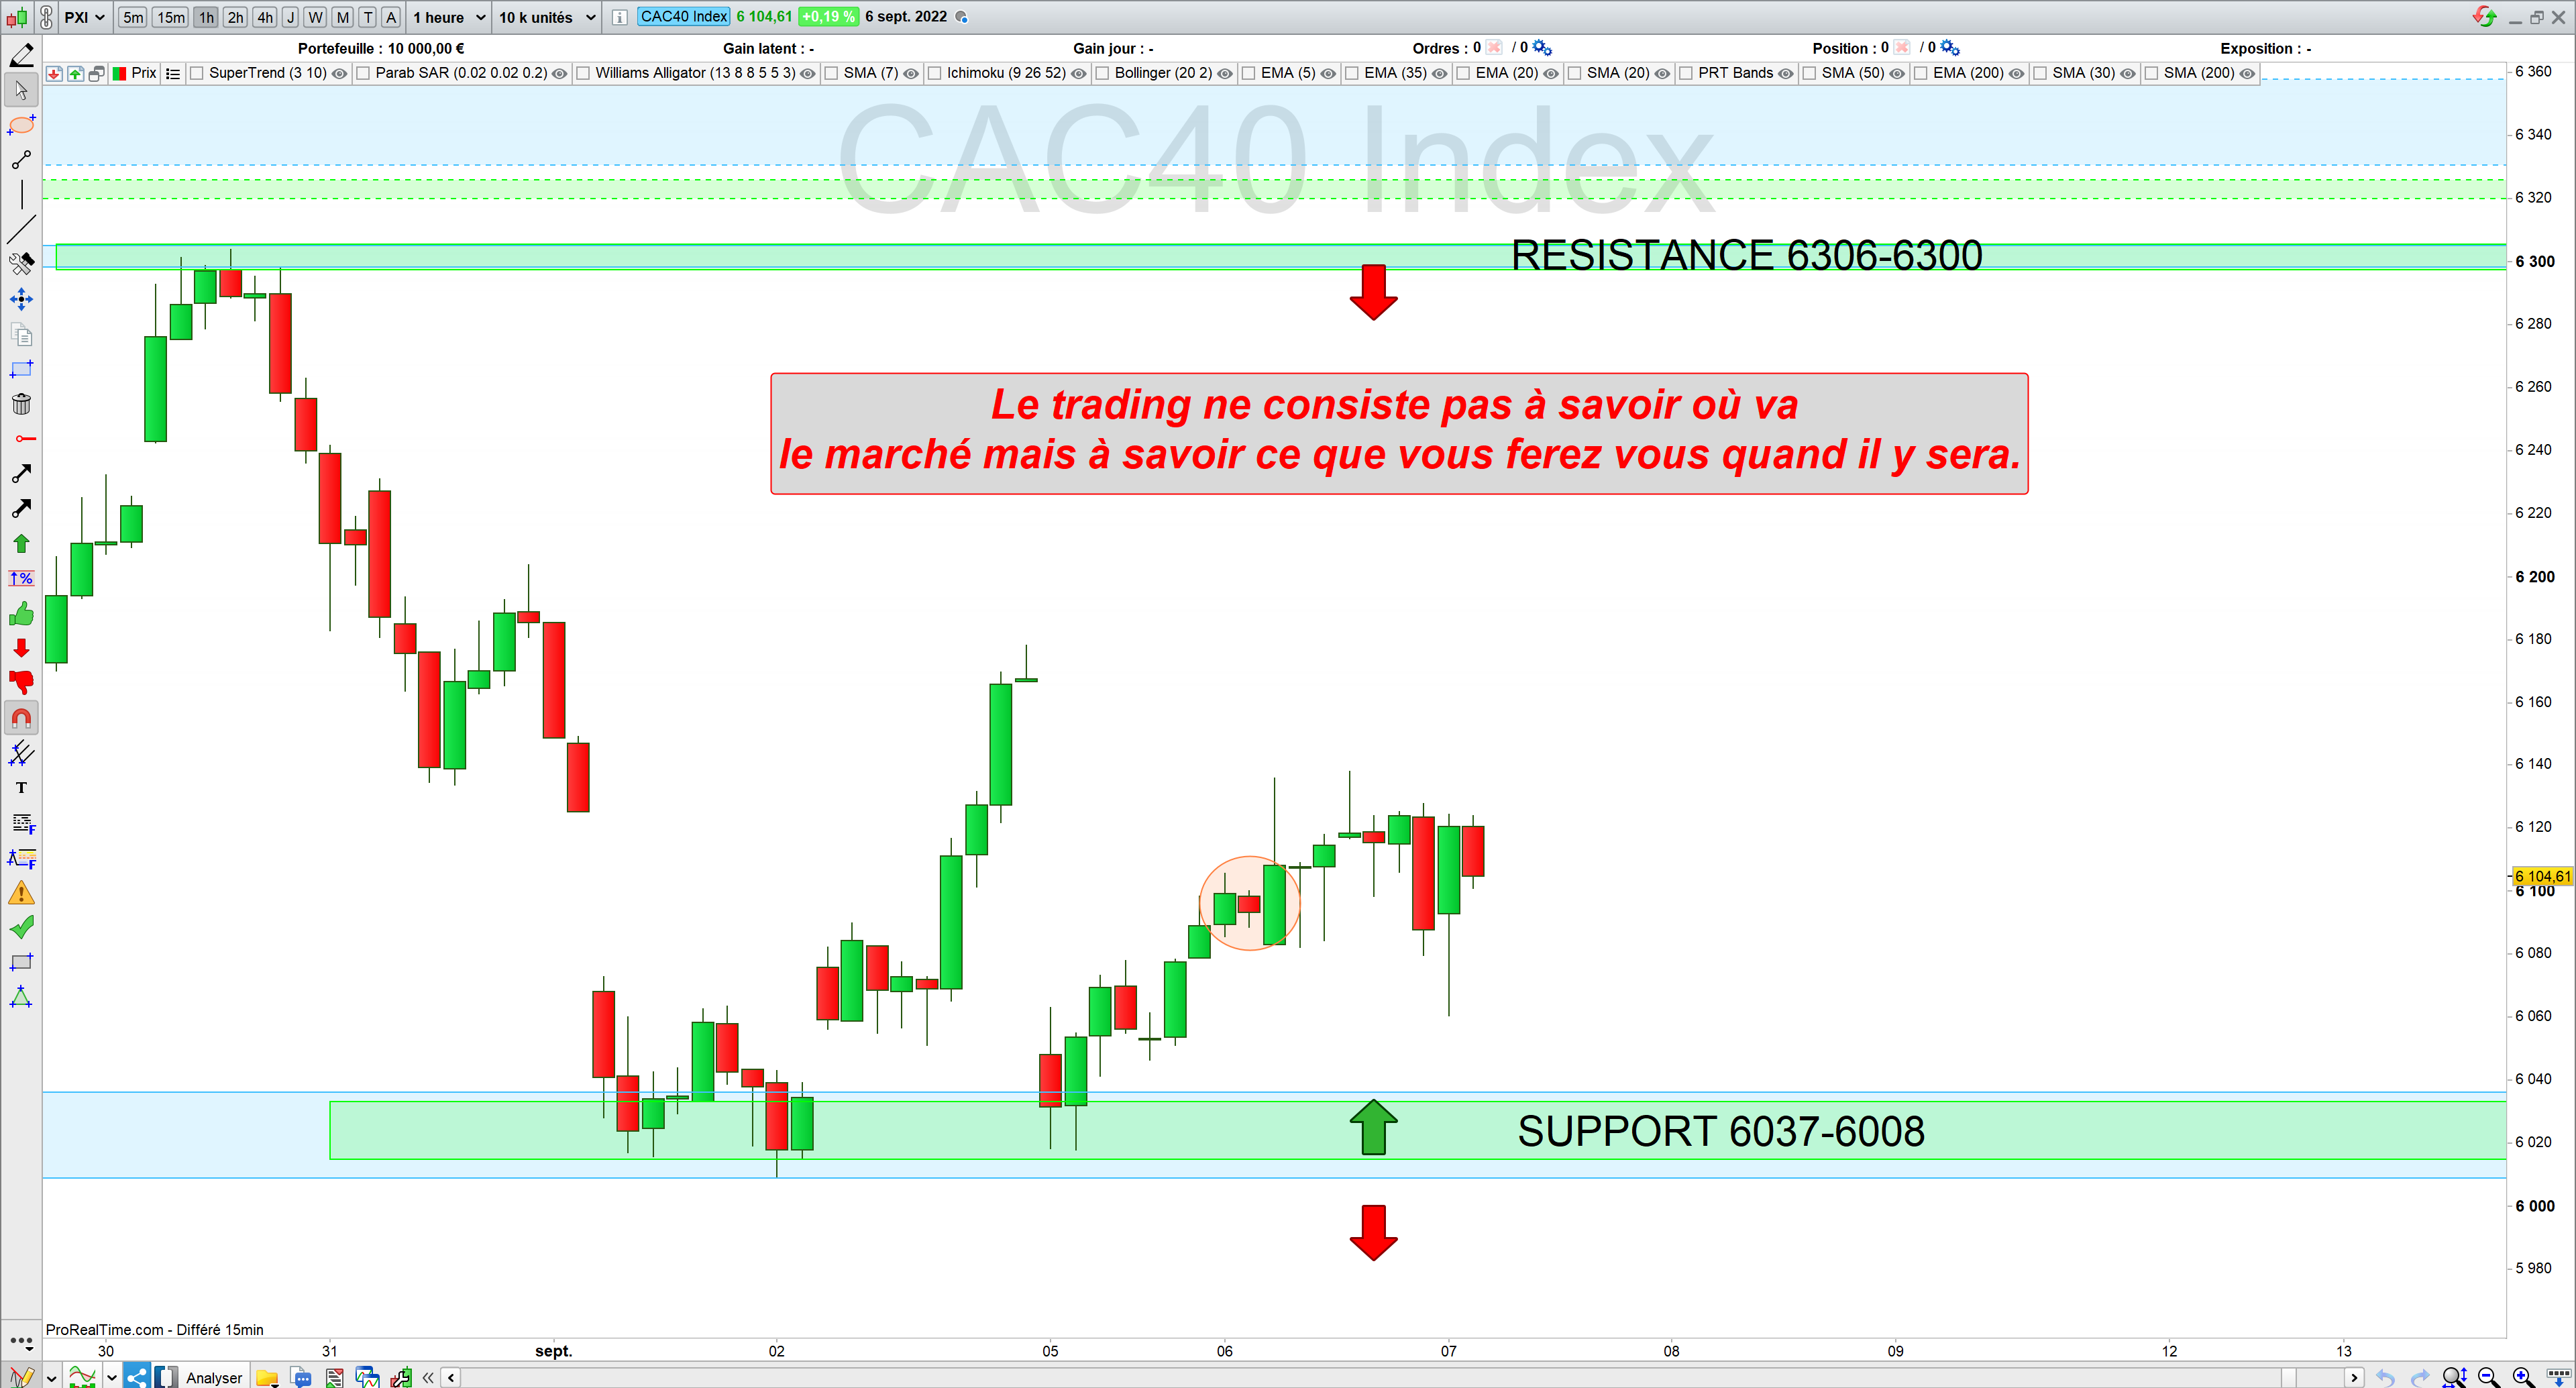 Trading cac40 06/09/22